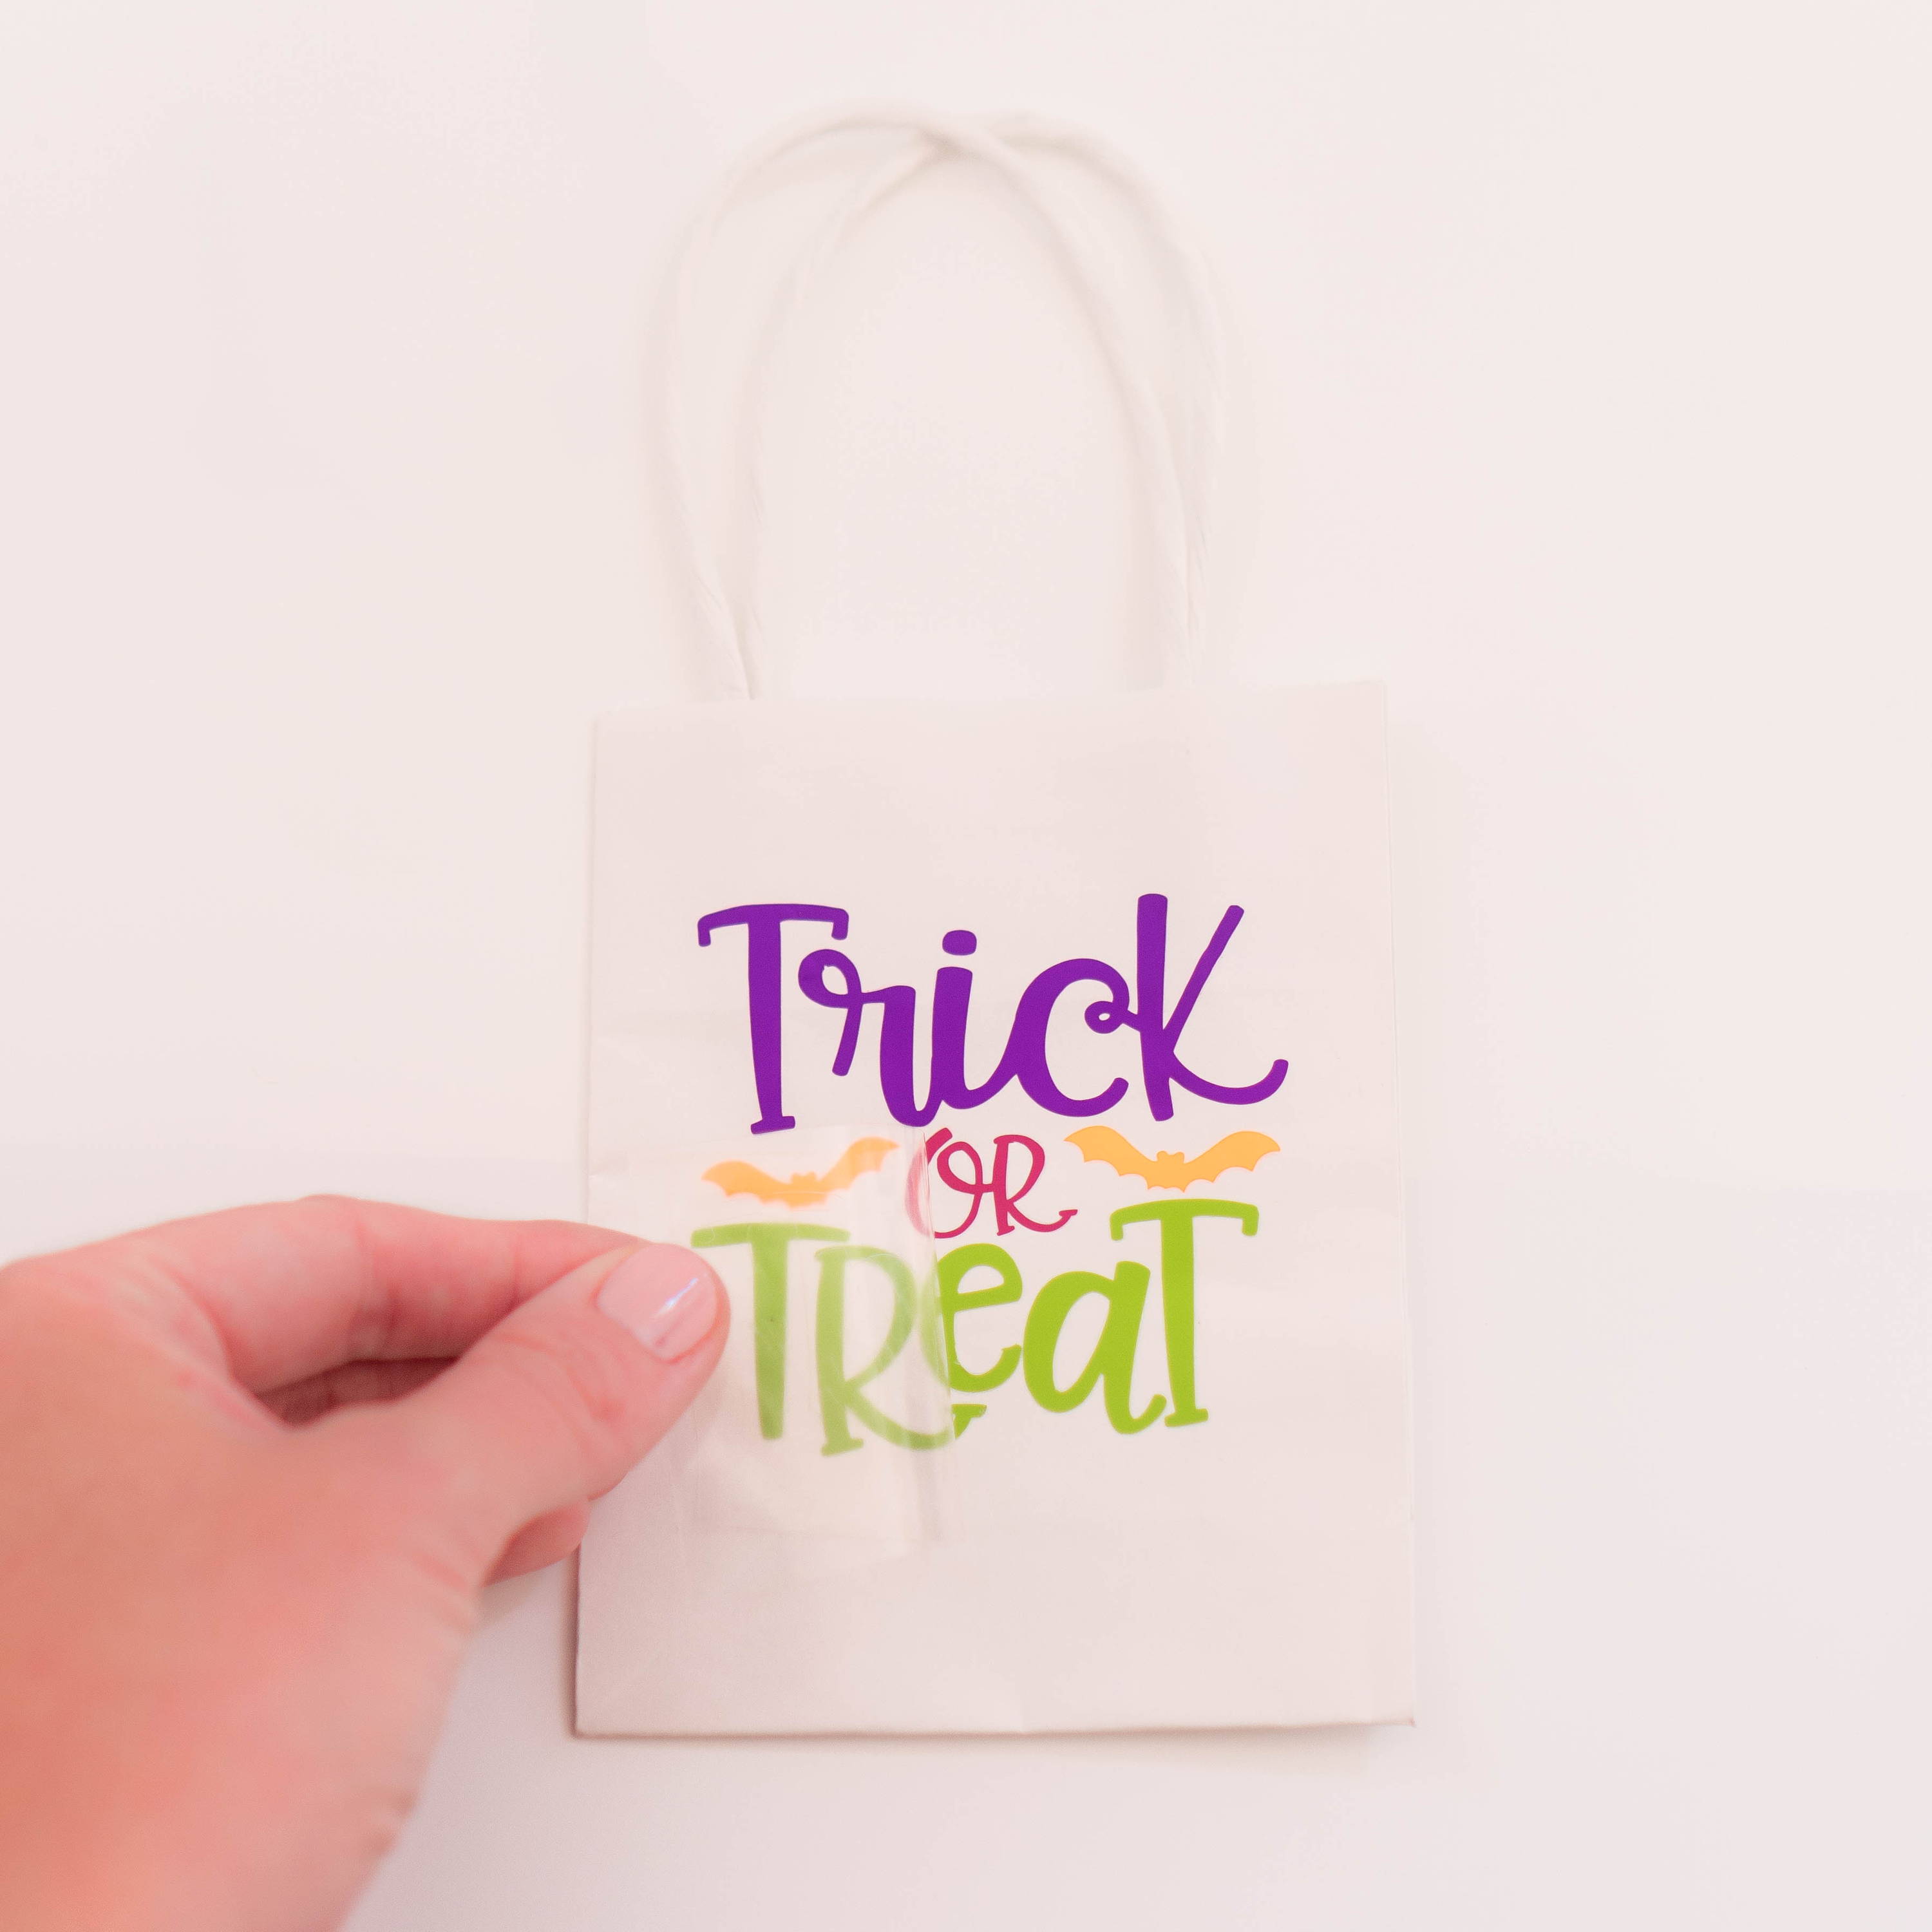 Fall Tote Bag With Craftey Glitter Heat Transfer Vinyl - Kayla Makes